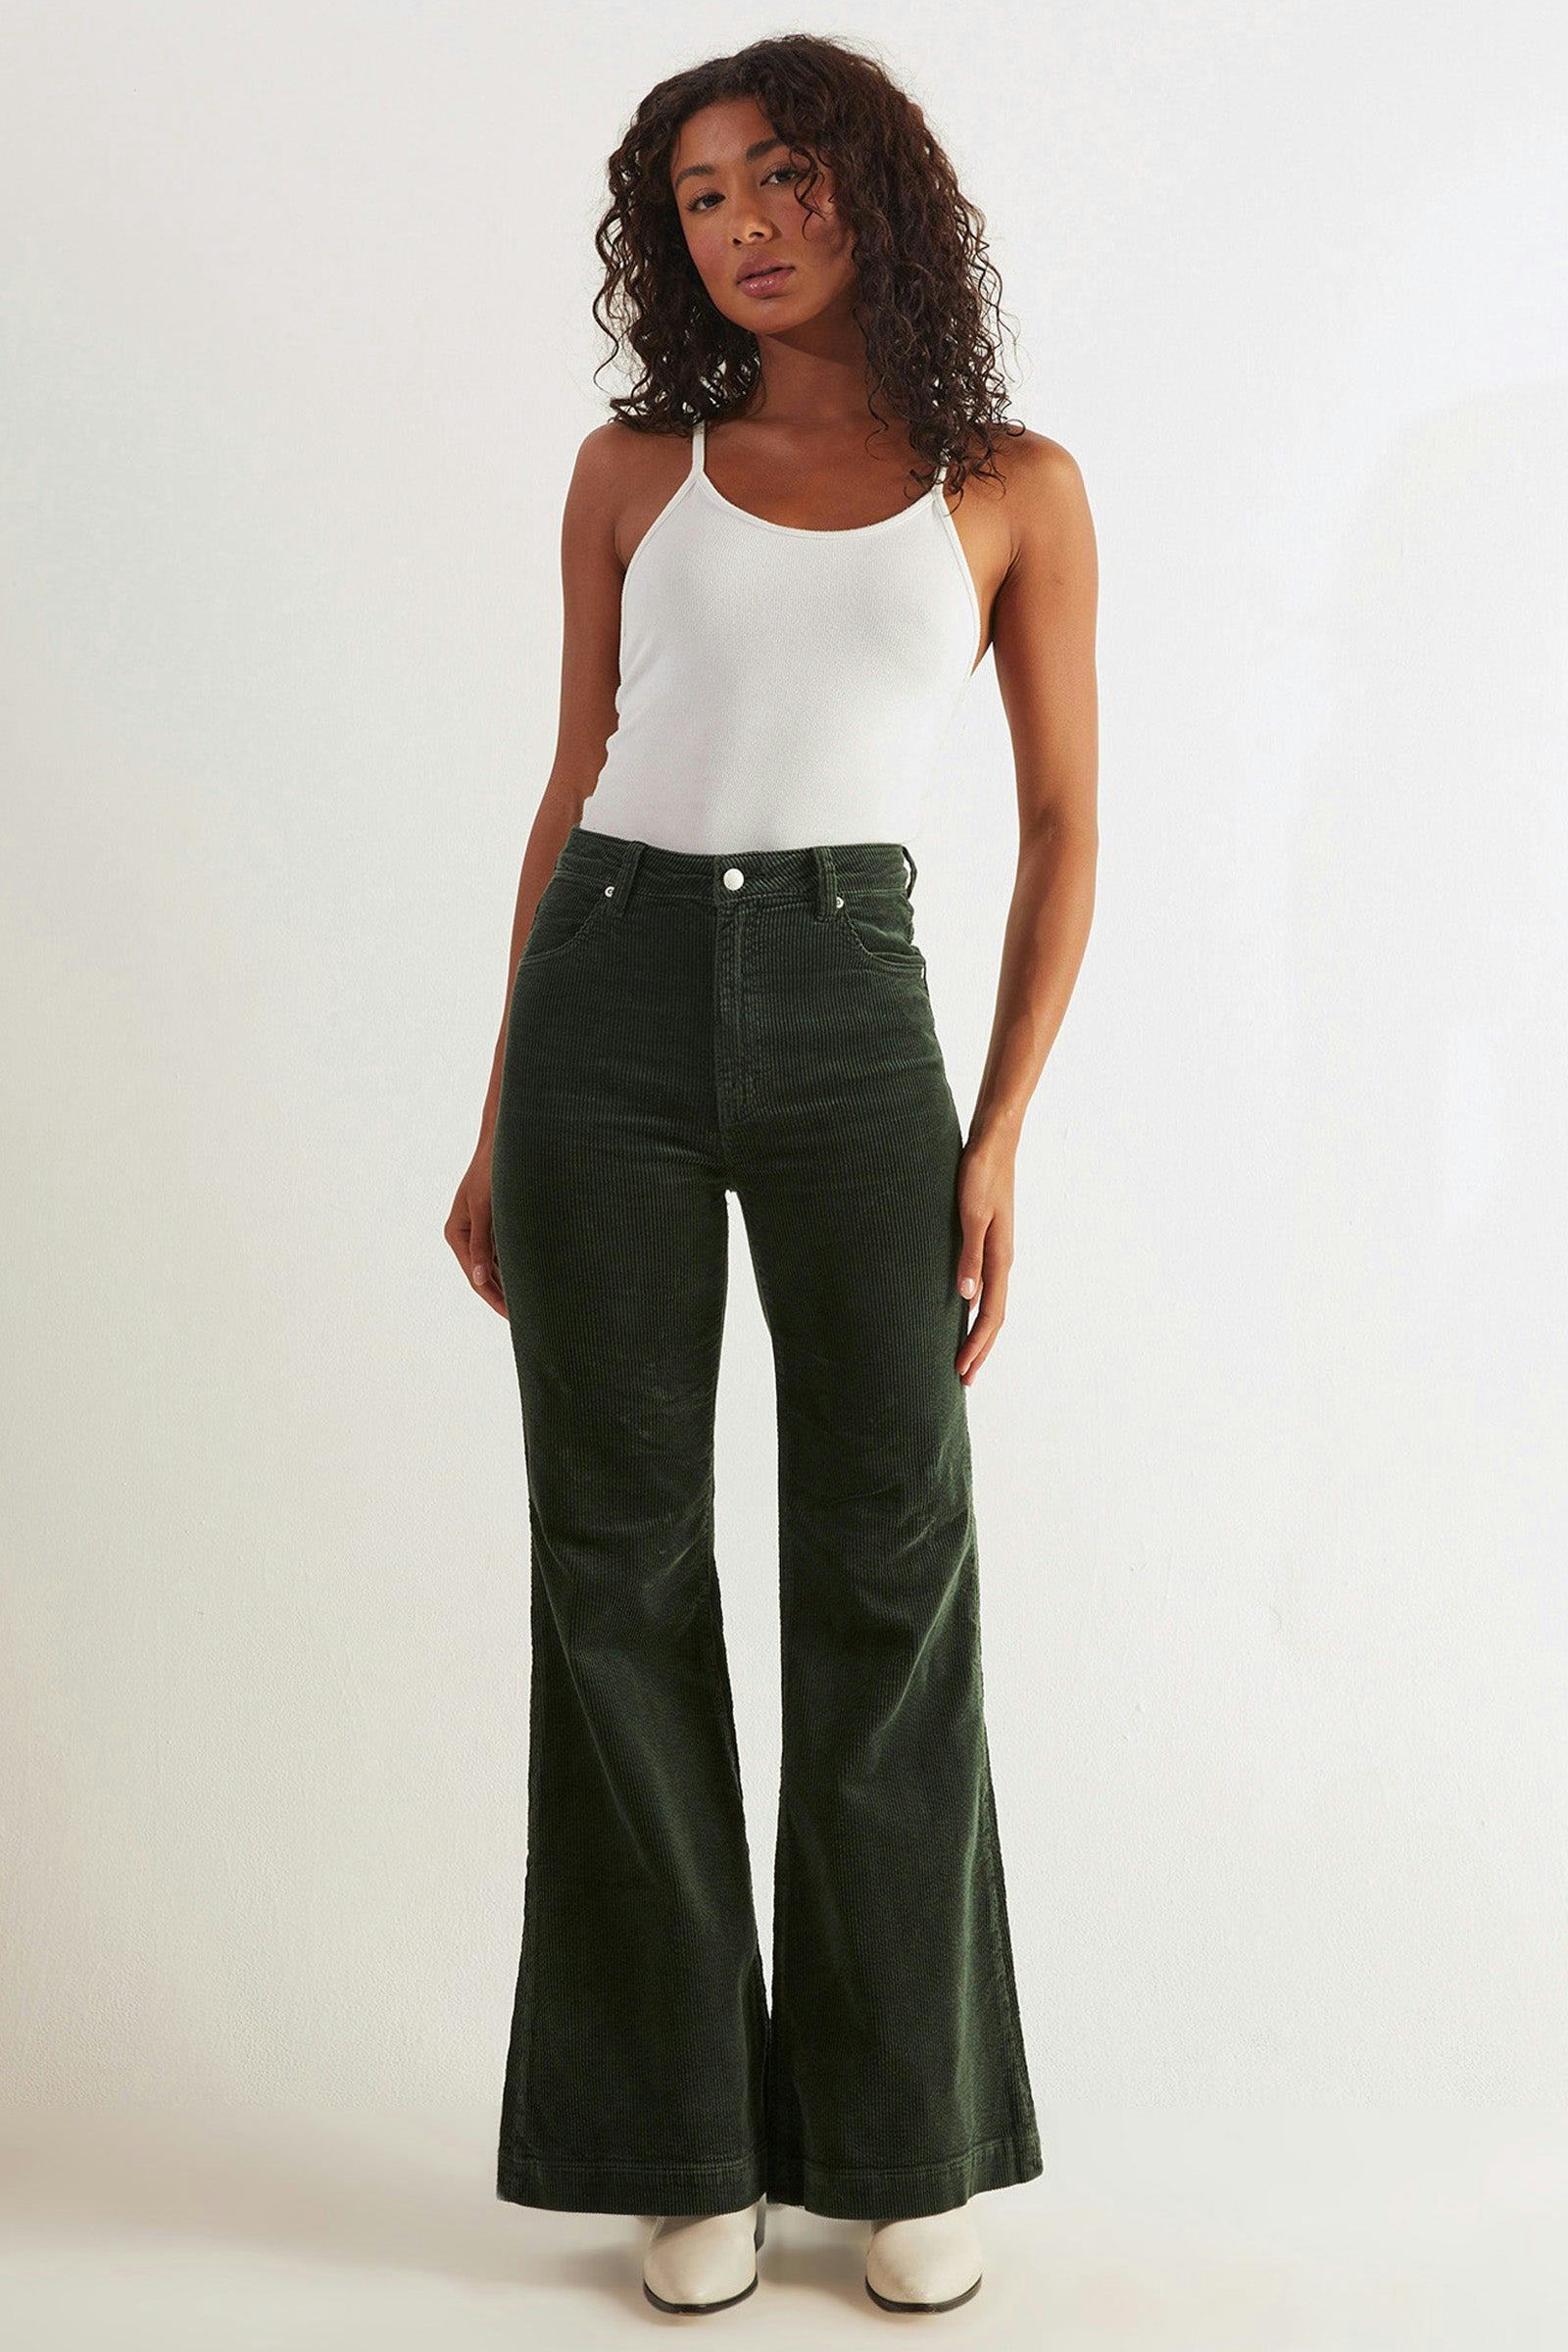 Rolla's Jeans - @best.dressed wearing our Ivy Cord Flare.